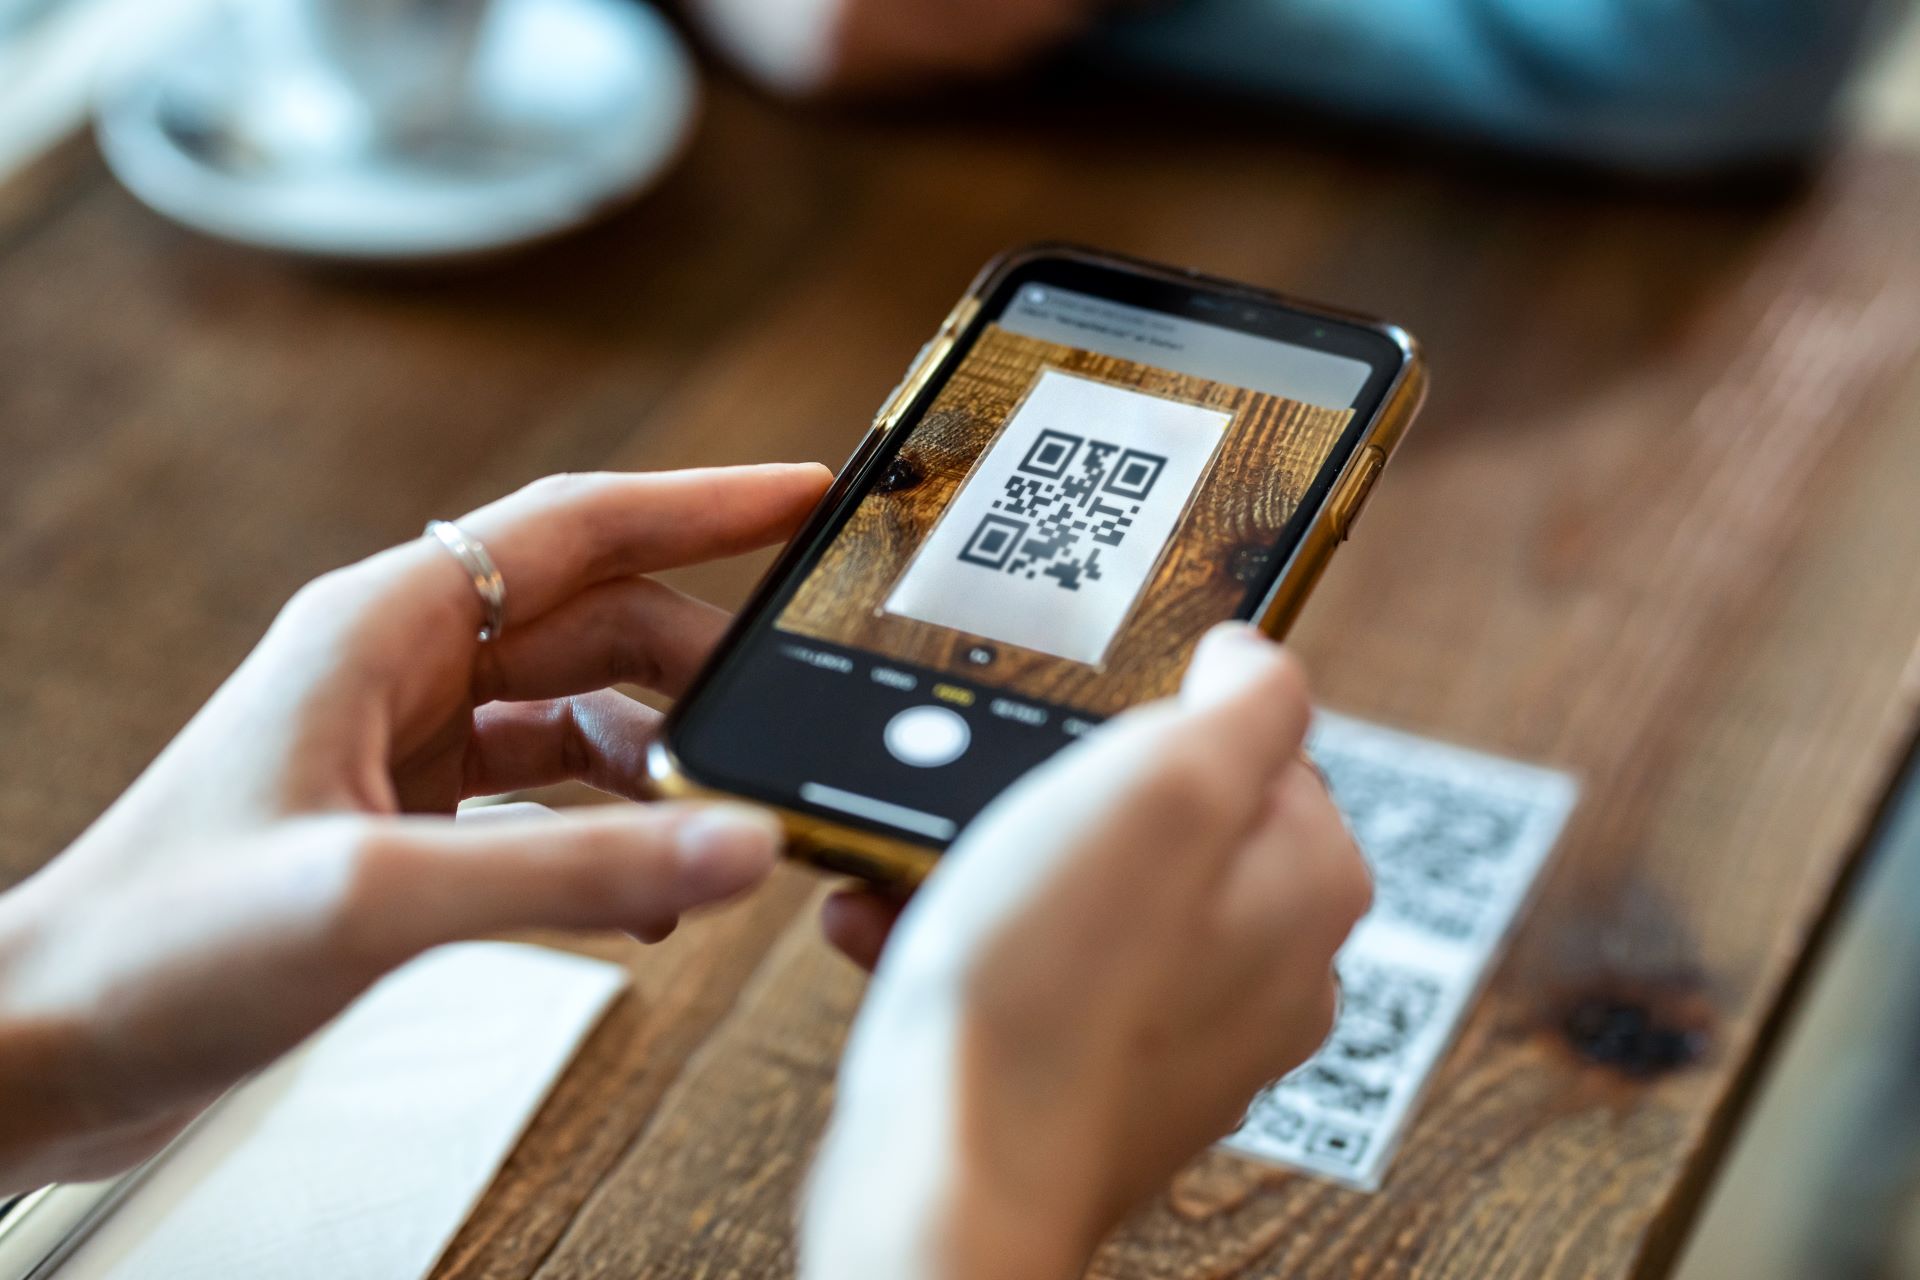 custom banners, a lady scanning a QR code to attain special offers and coupons.